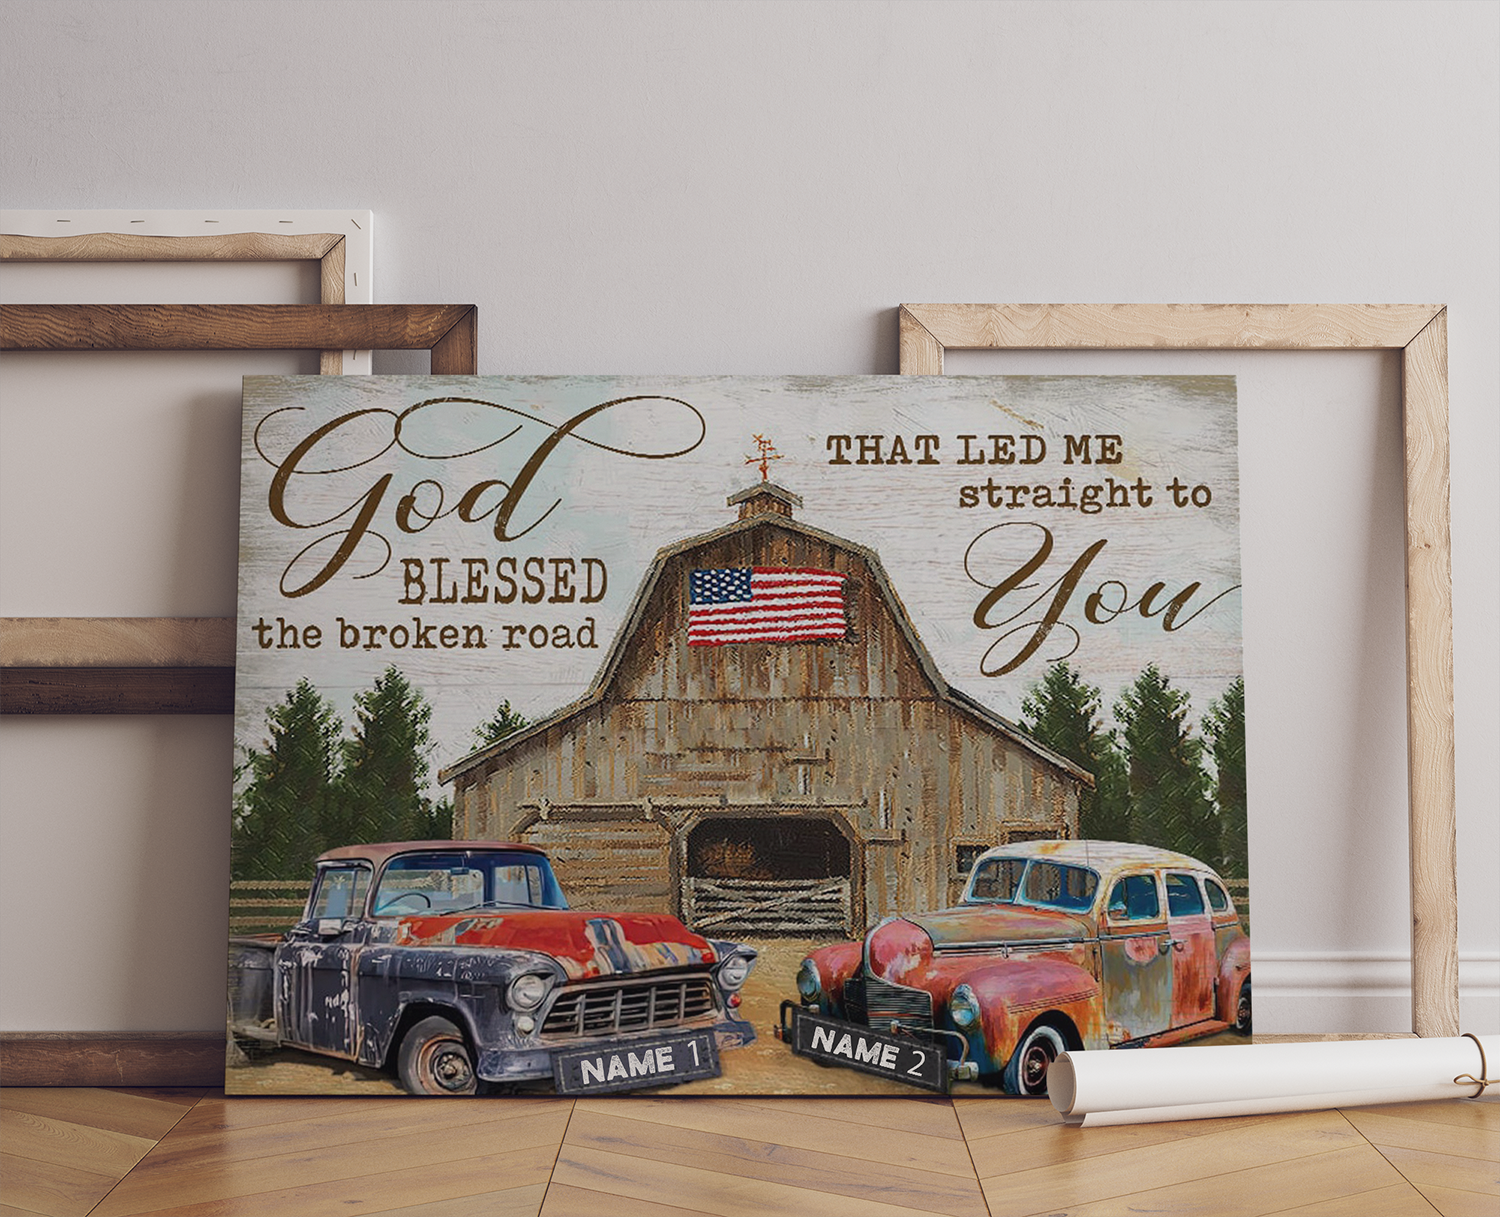 Personalized, God Blessed The Broken Road That Led Me Straight To You,Truck and Country Barn Canvas Prints